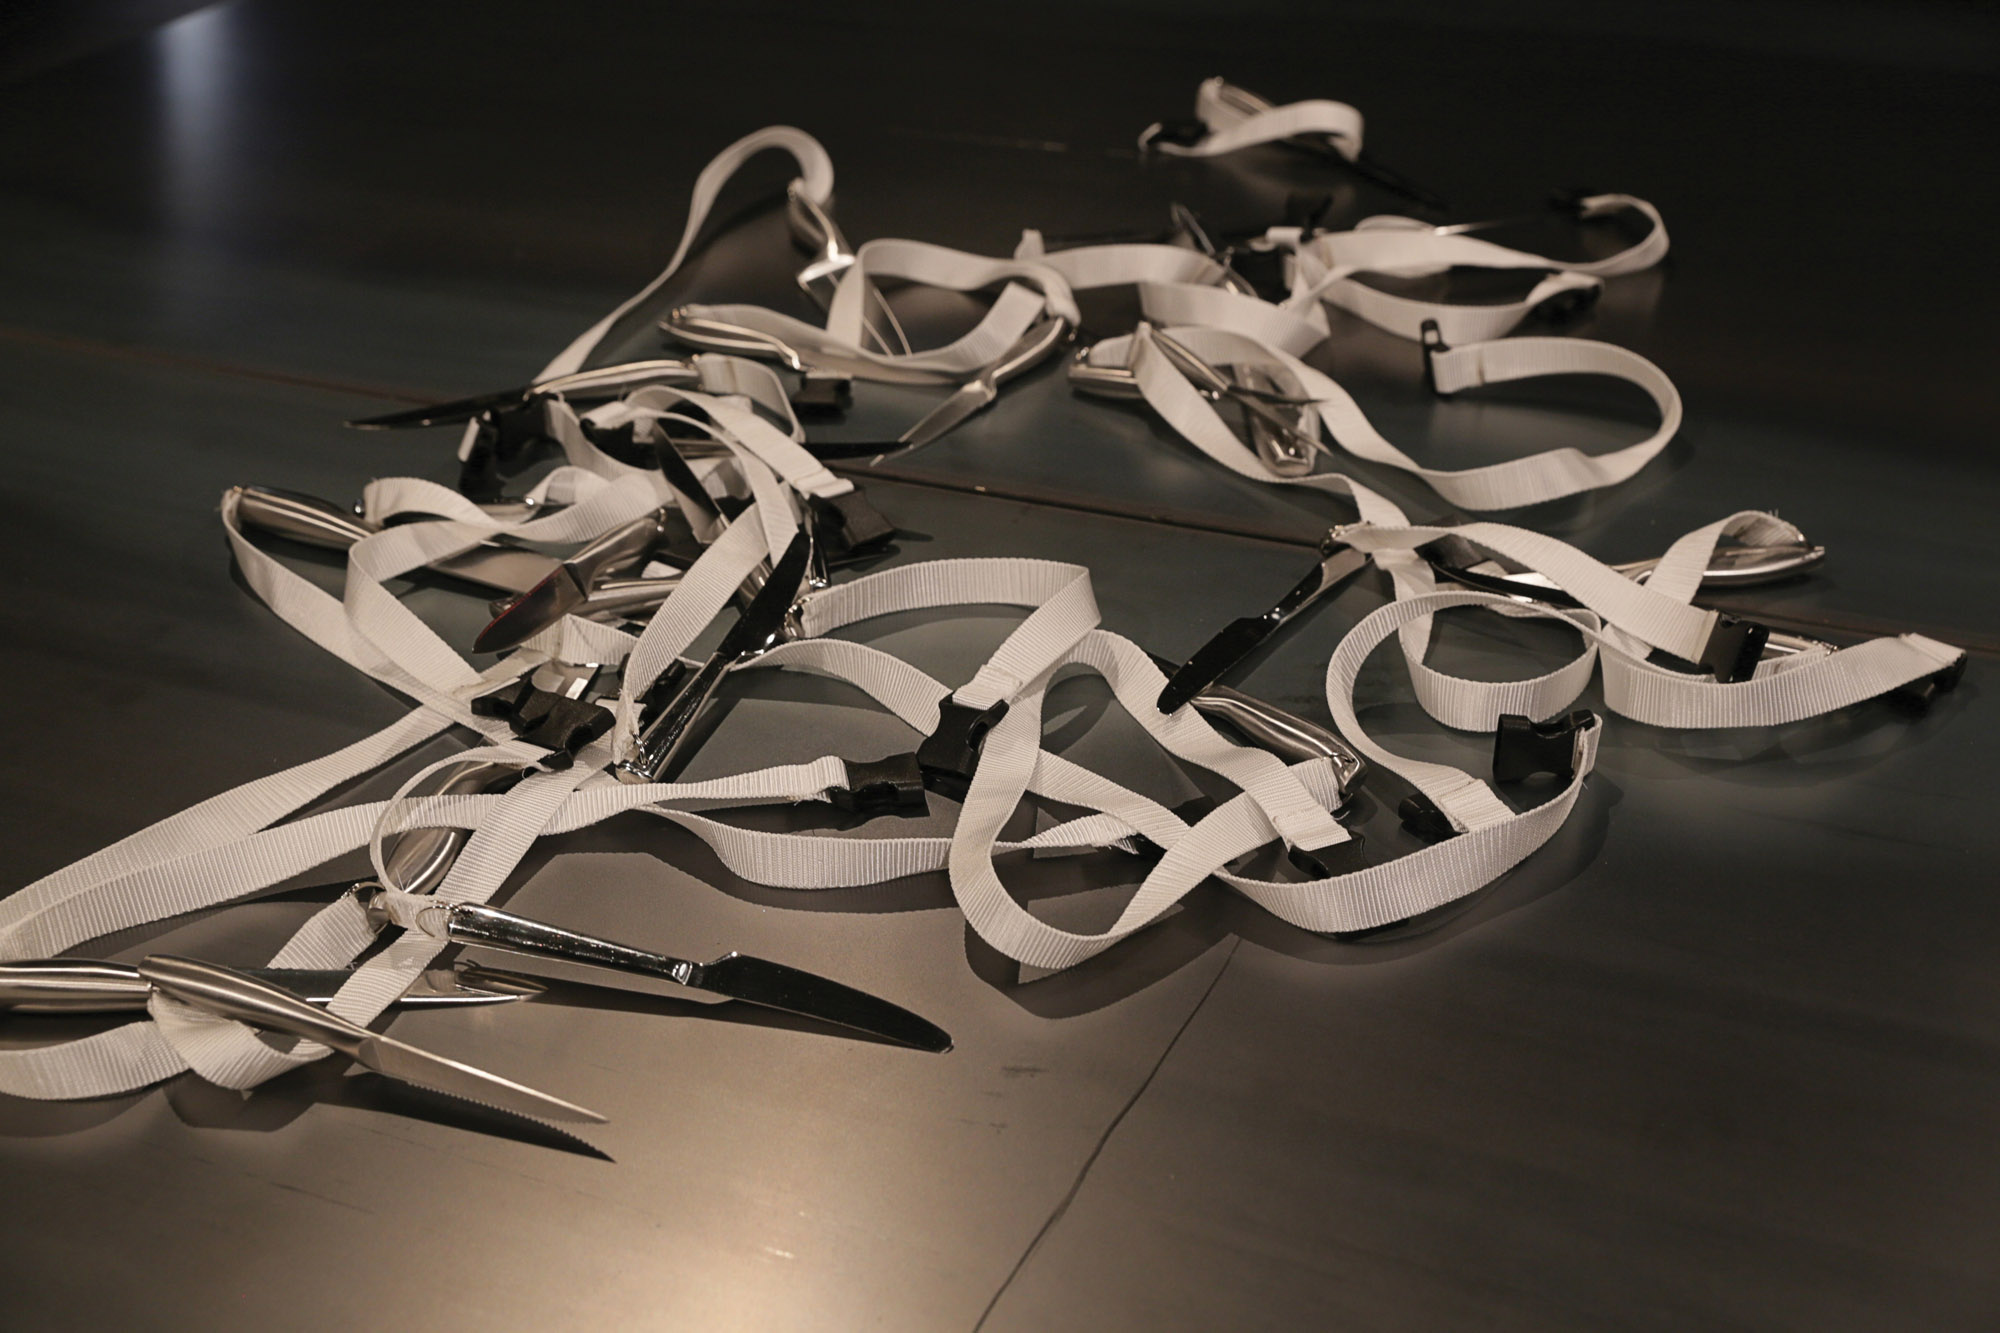 A white strap tangled with butter knives attached lying on a black floor.